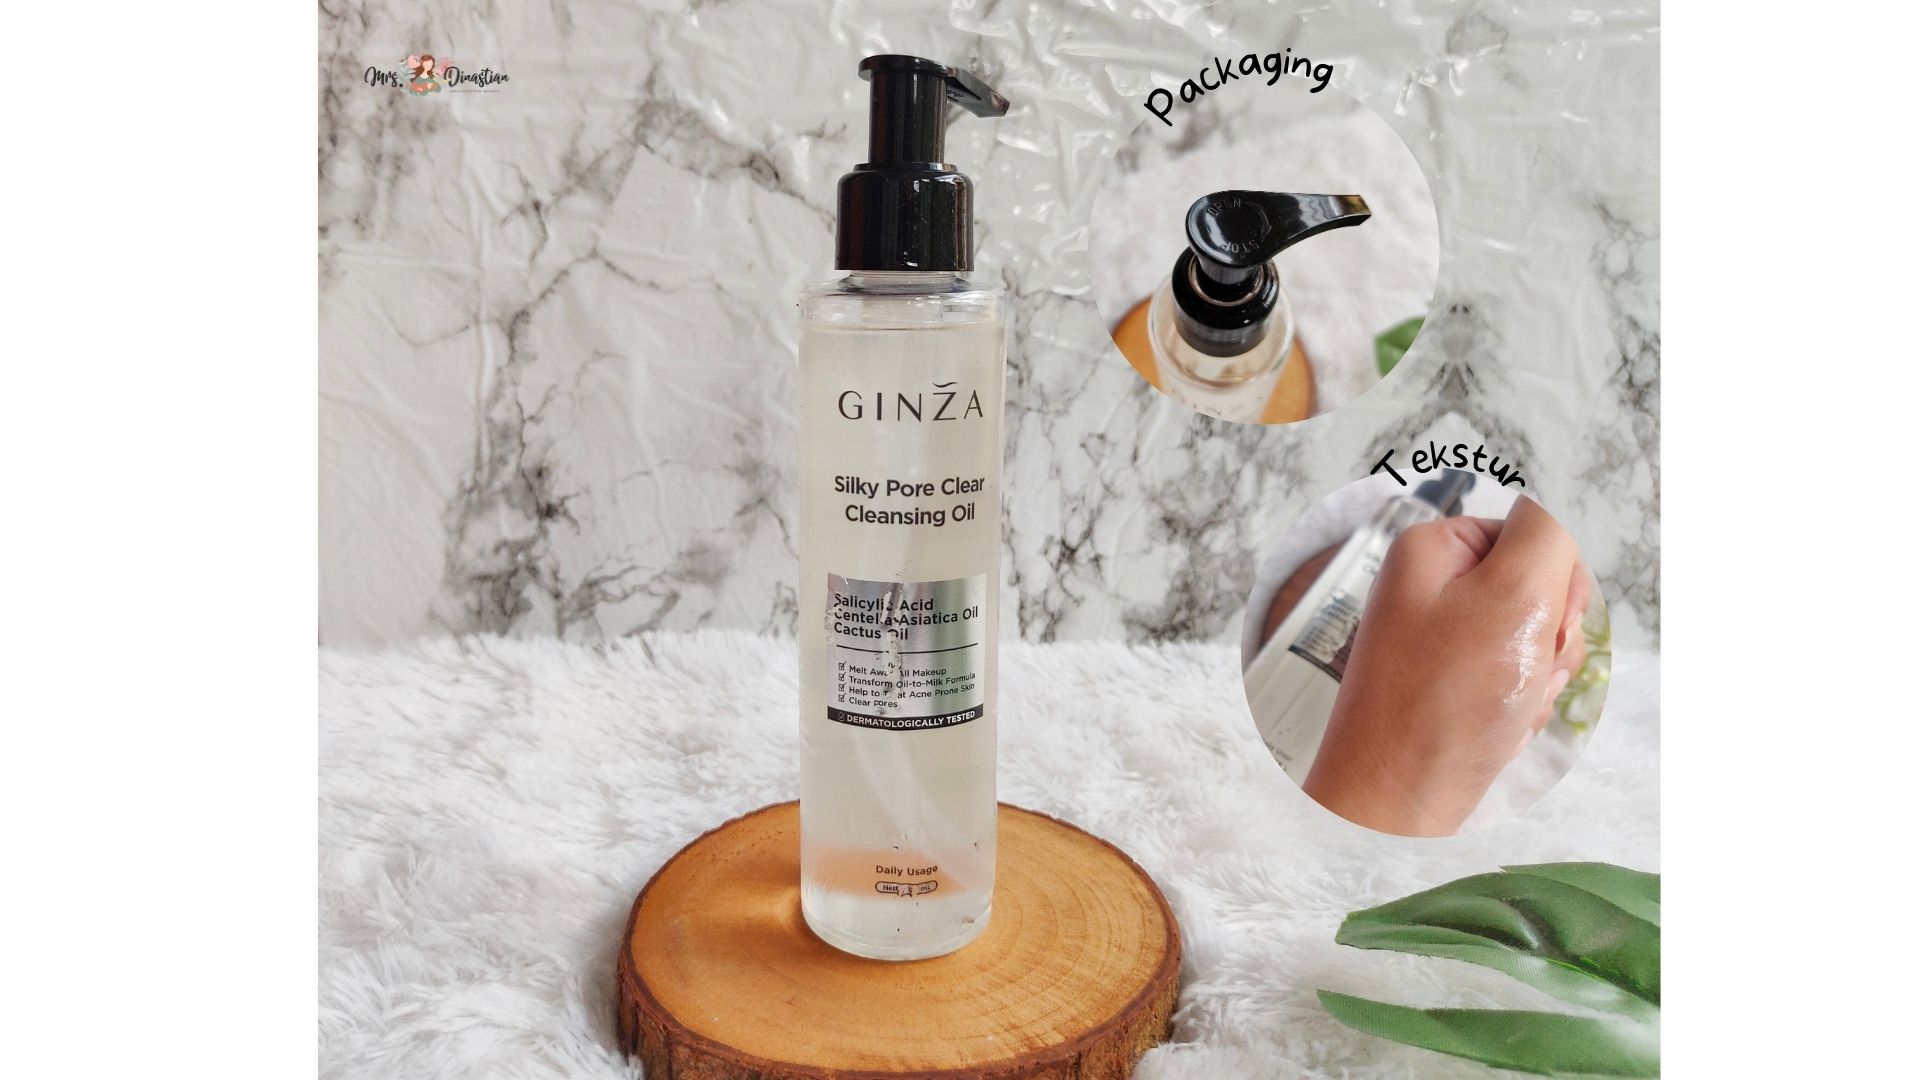 Ginza Silky Pore Clear Cleansing Oil